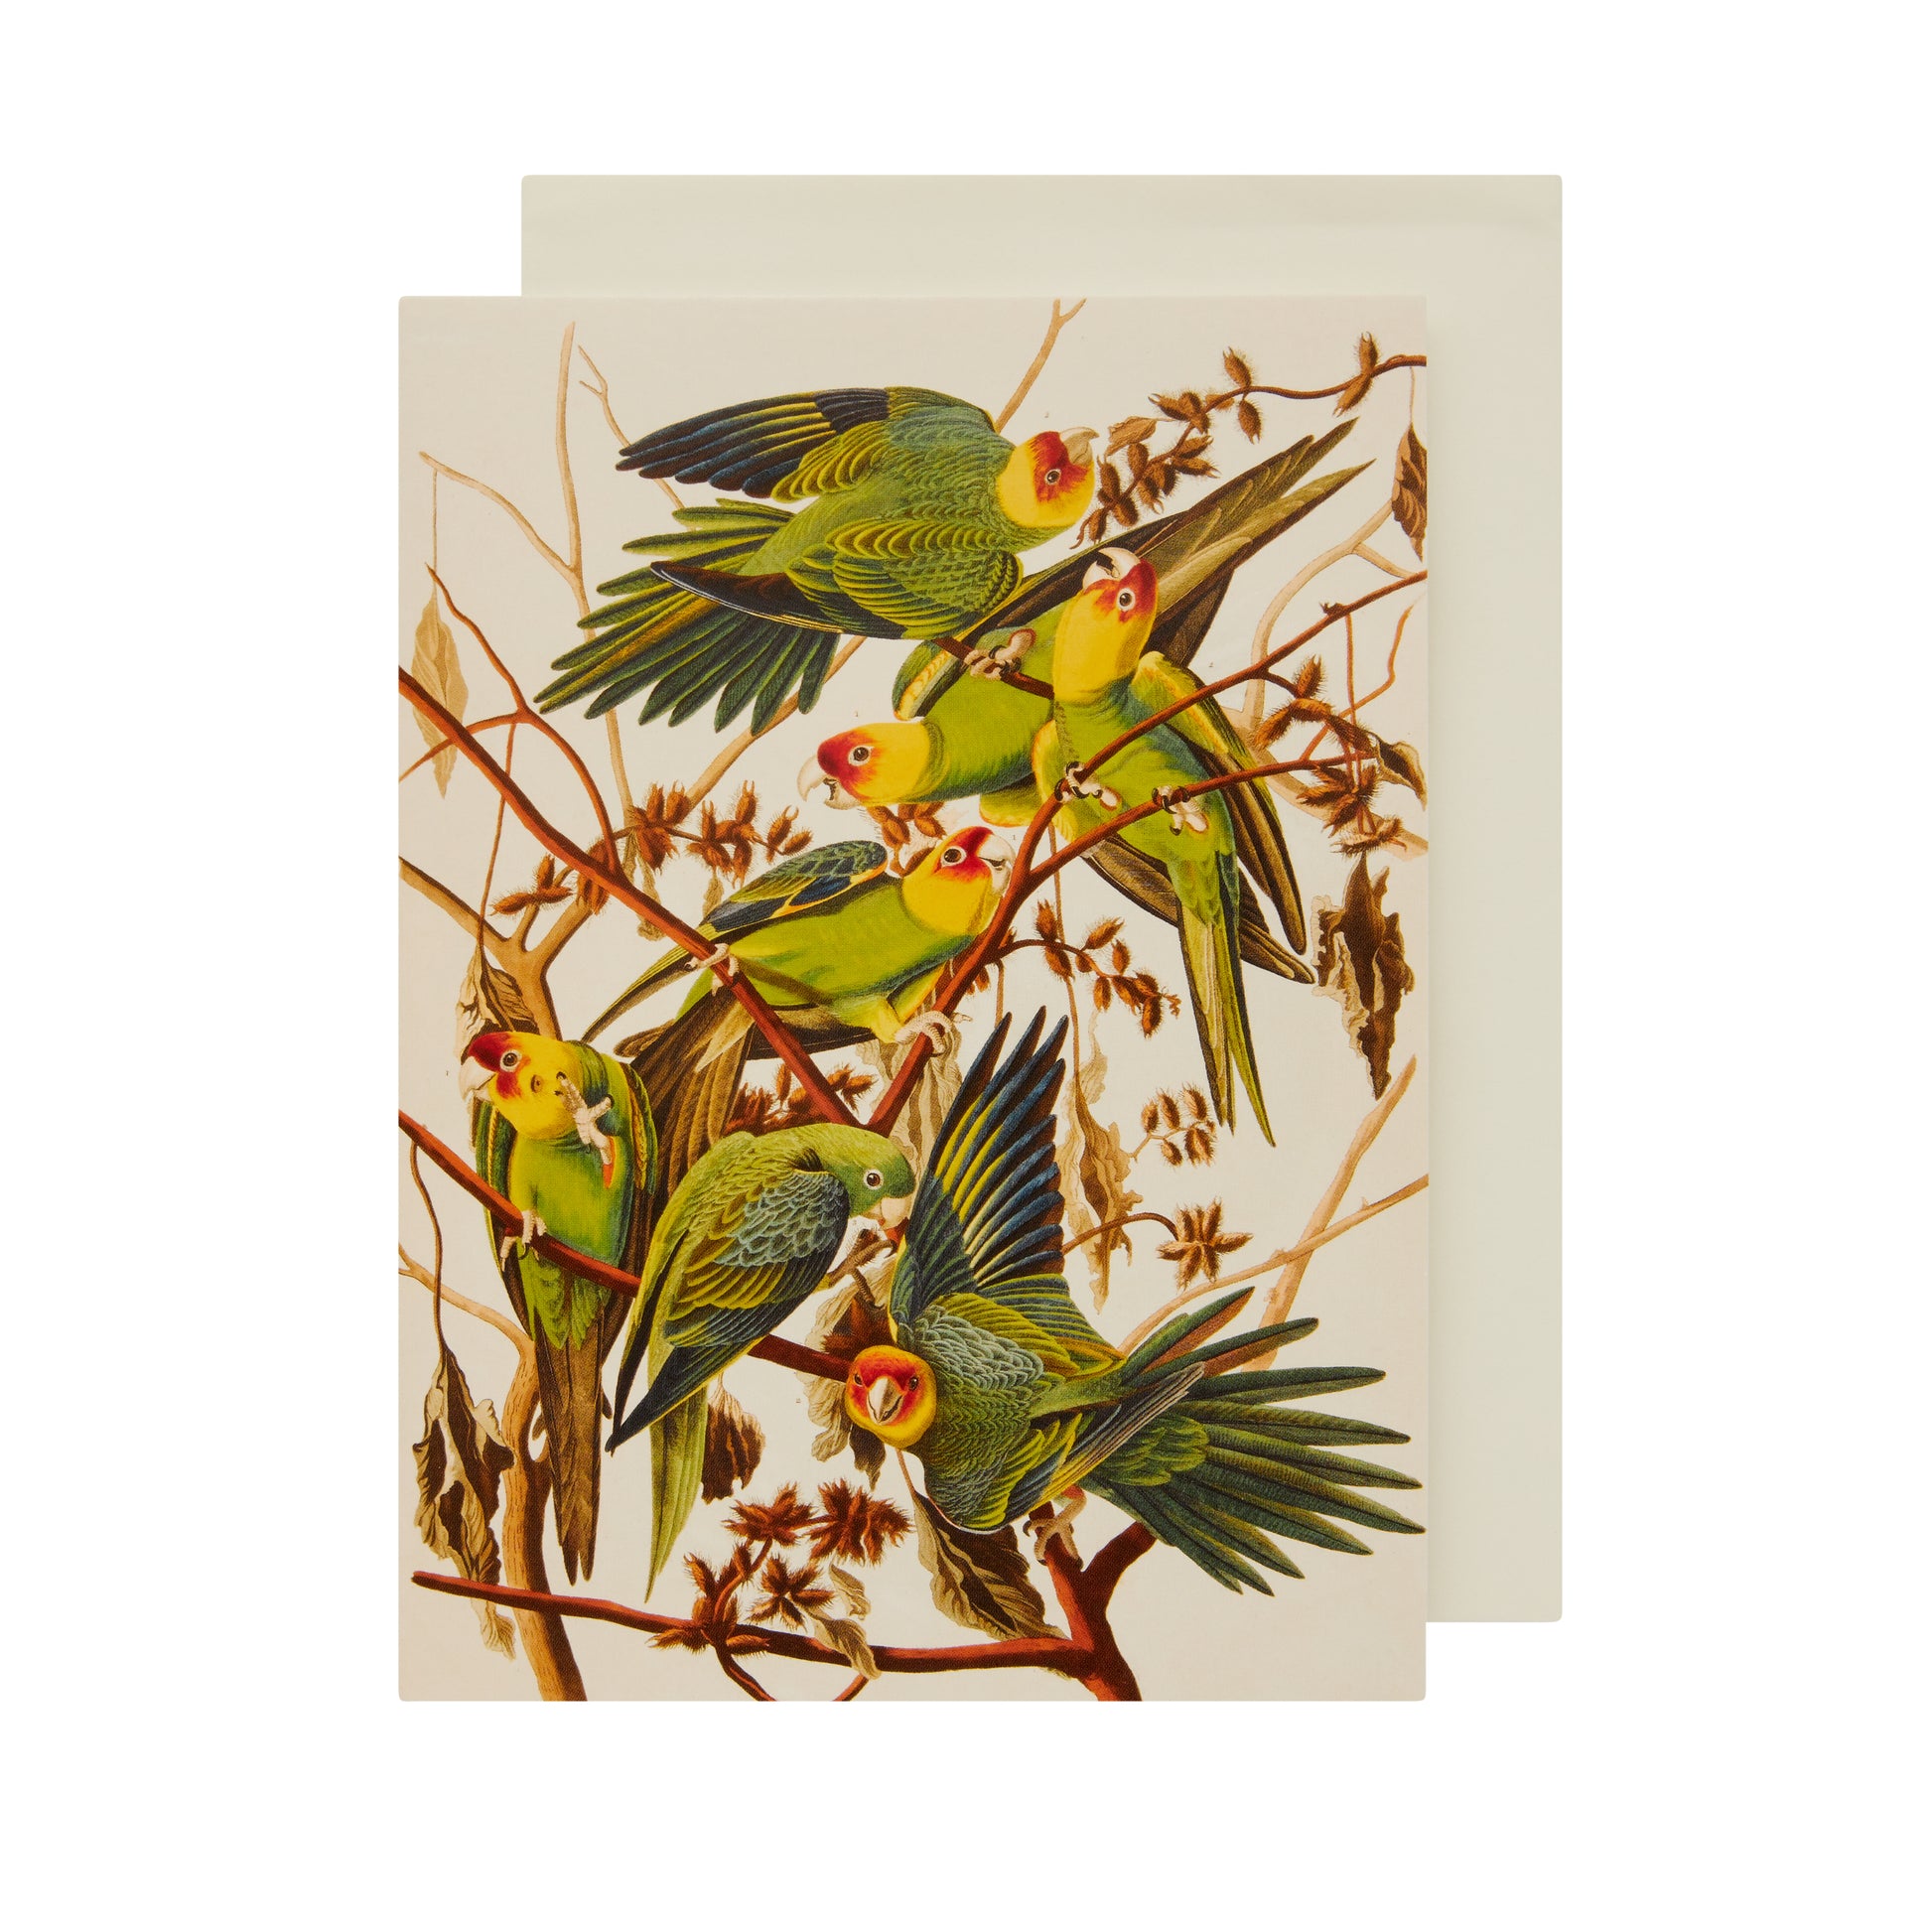 Greeting card, portrait format. Carolina parakeets by John James Audubon. Several bright green small parrots with yellow and red heads/faces on a branch. From the collection of The Fitzwilliam Museum, brought to you by CuratingCambridge.co.uk